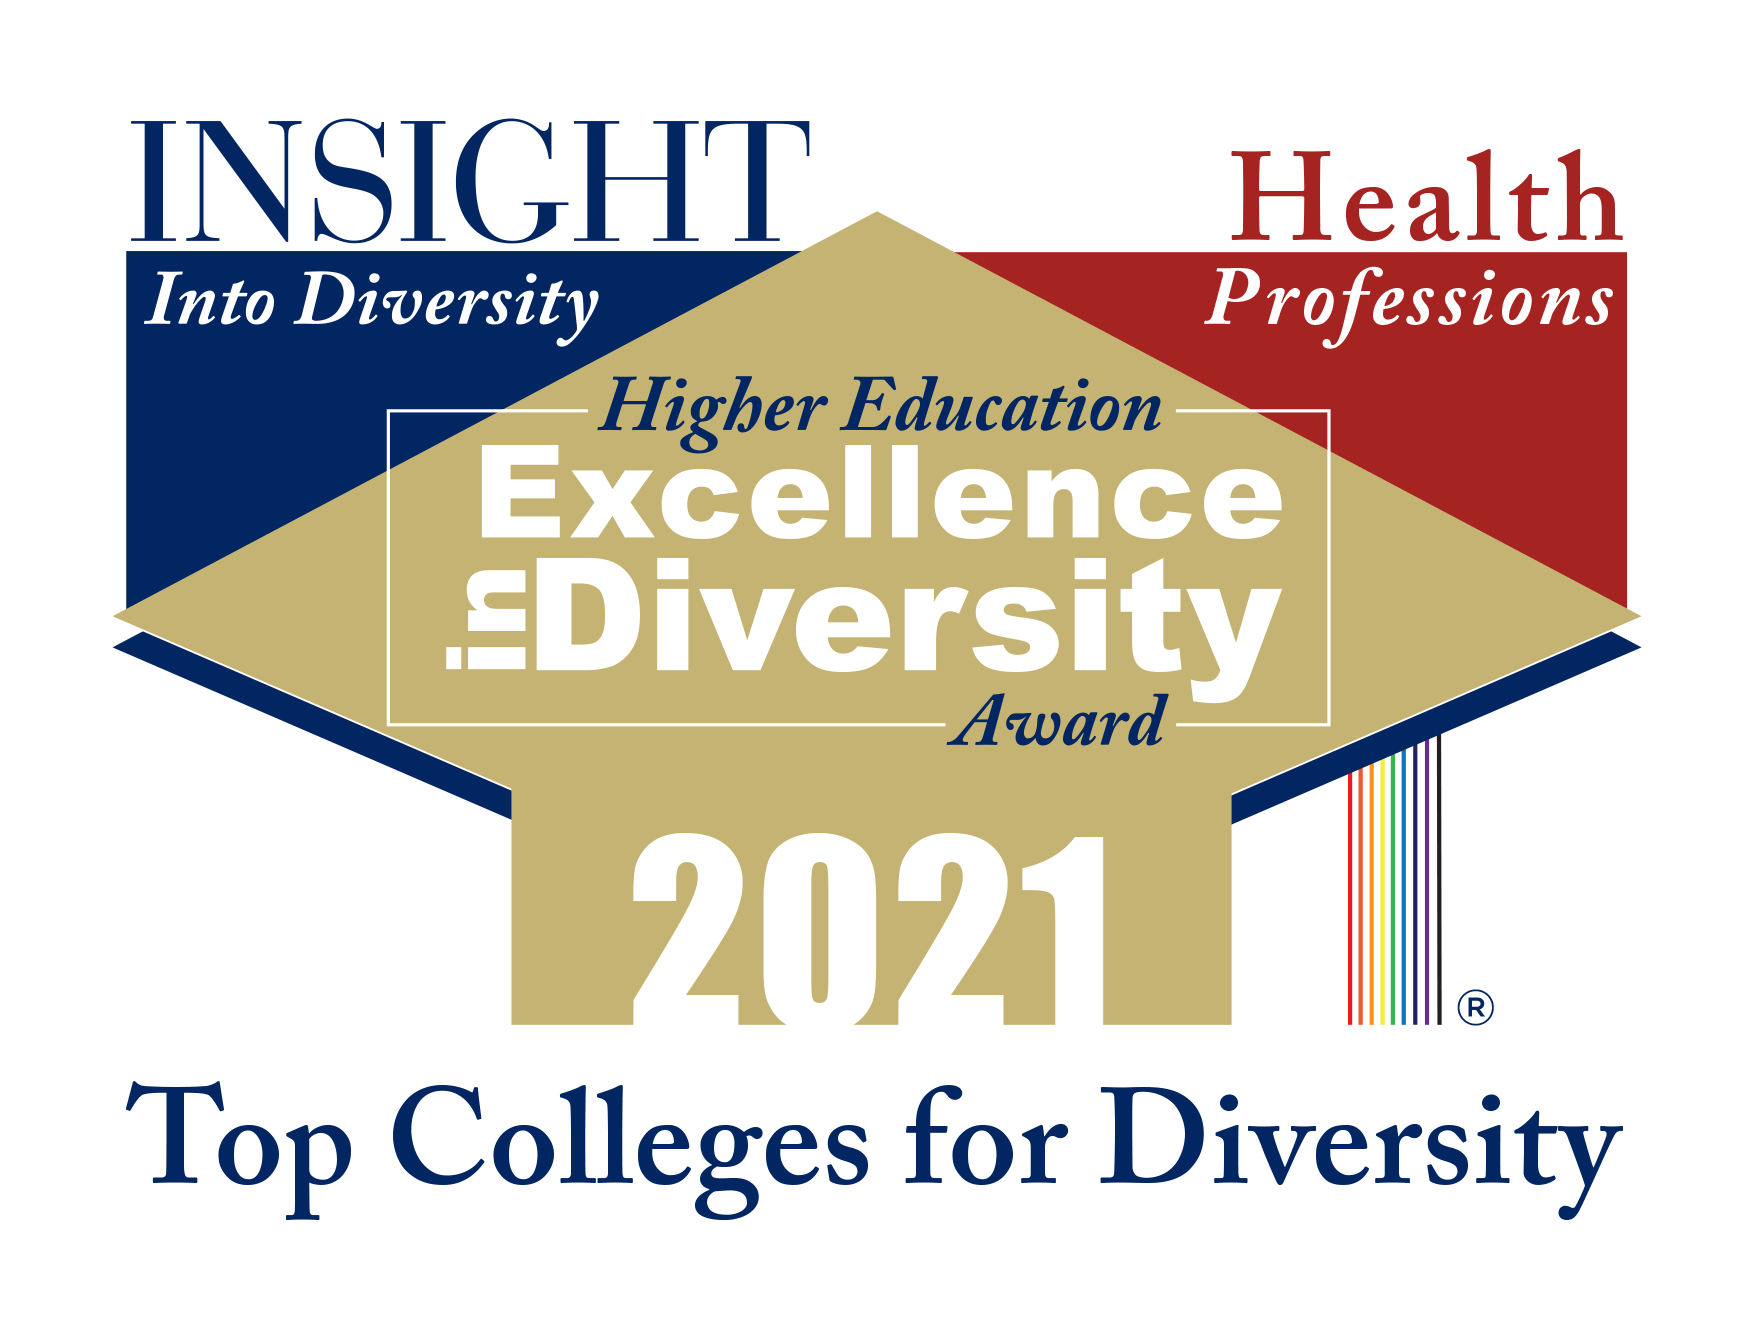 Insight Into Diversity 2021 Health Professions Higher Education Excellence in Diversity (HEED) Award logo